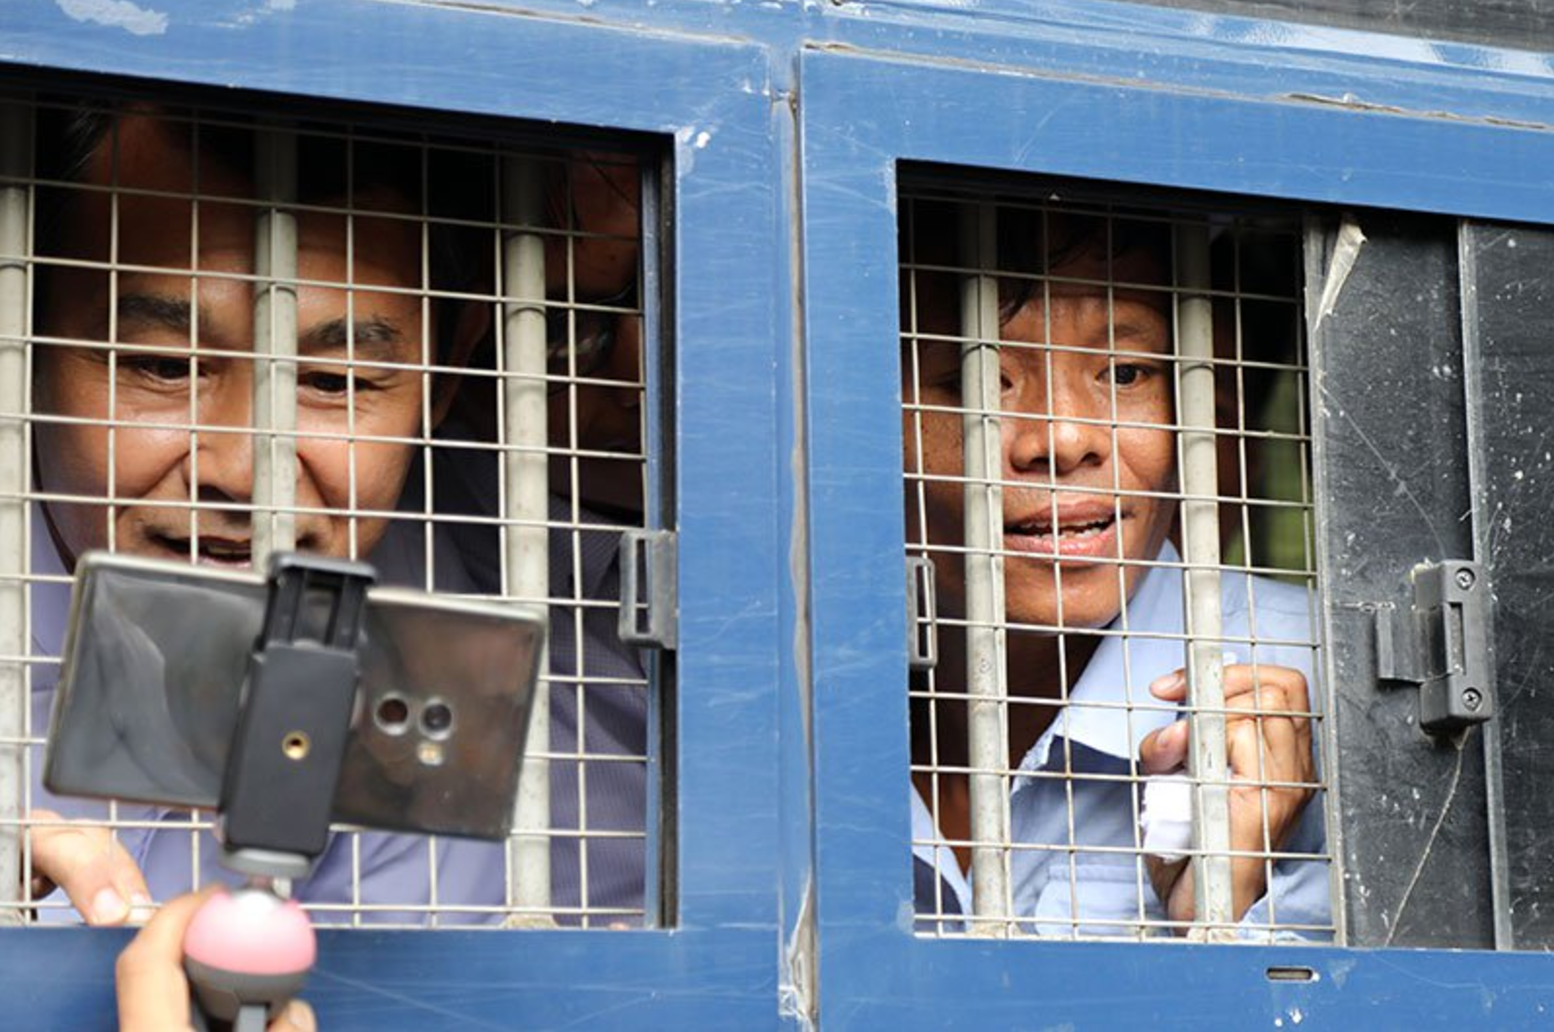 Journalists Aye Nai (L) and Lawi Weng speak to journalists from inside a prisoner transport vehicle outside the courthouse in Hsipaw in Shan State on July 28, 2017. Photo: AFP